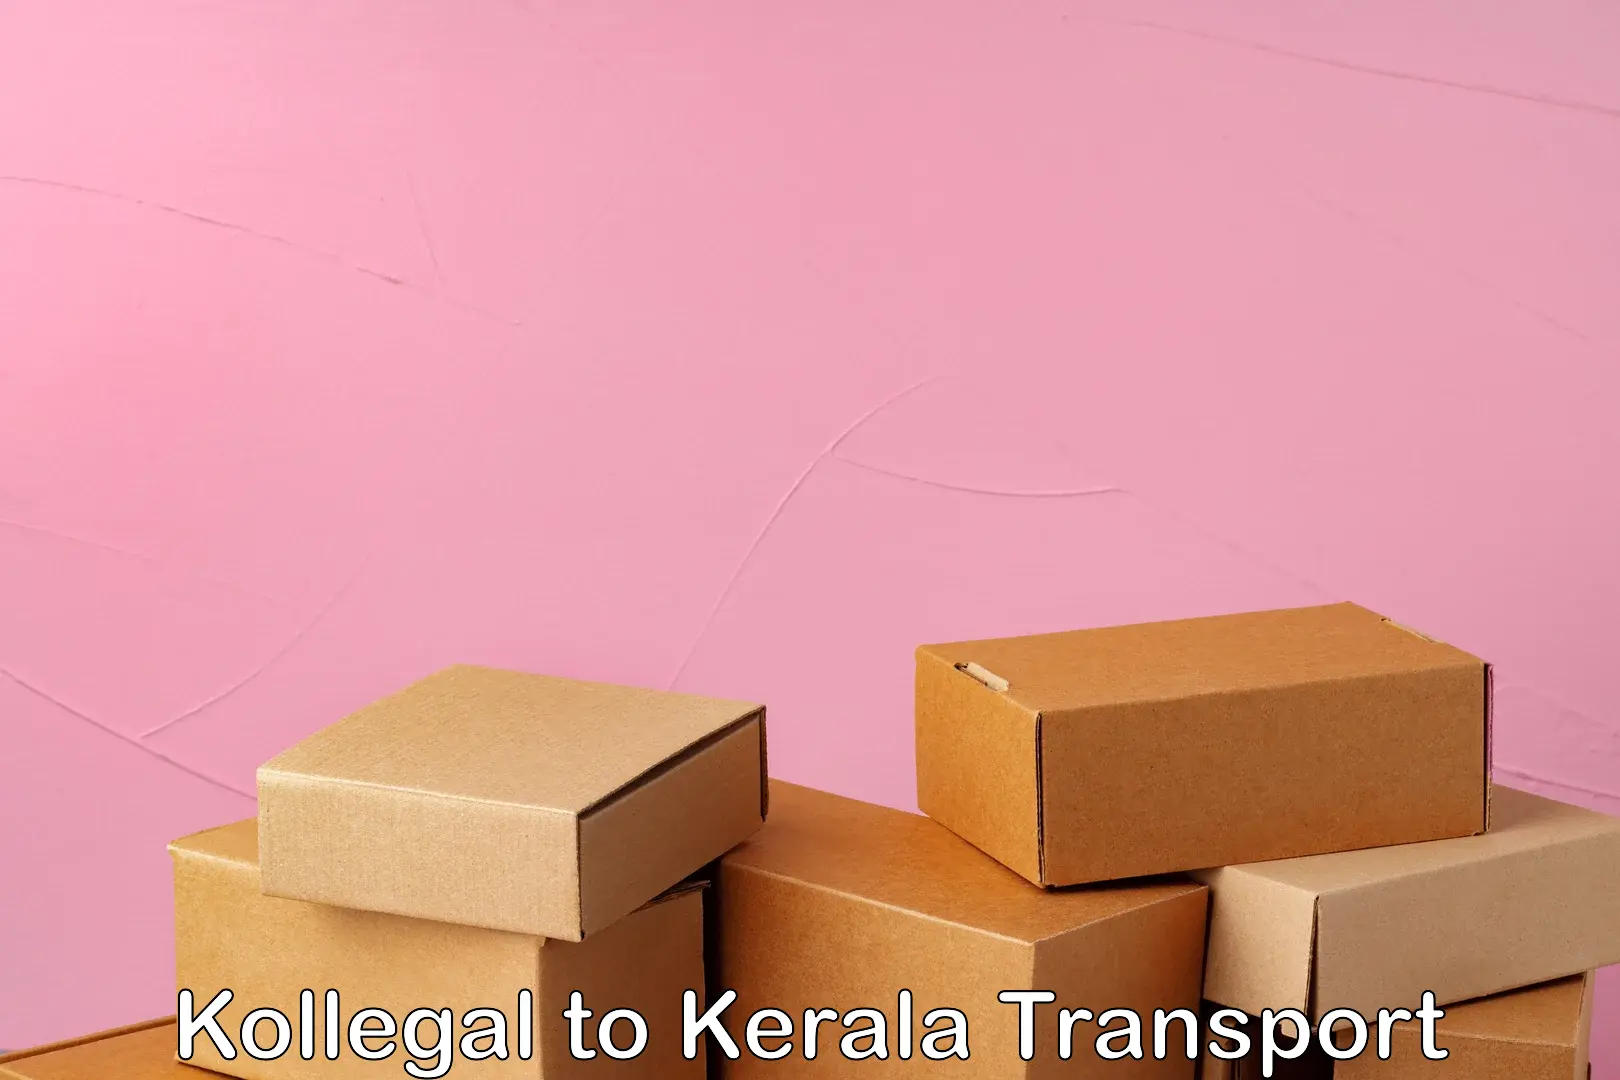 Express transport services in Kollegal to Kerala